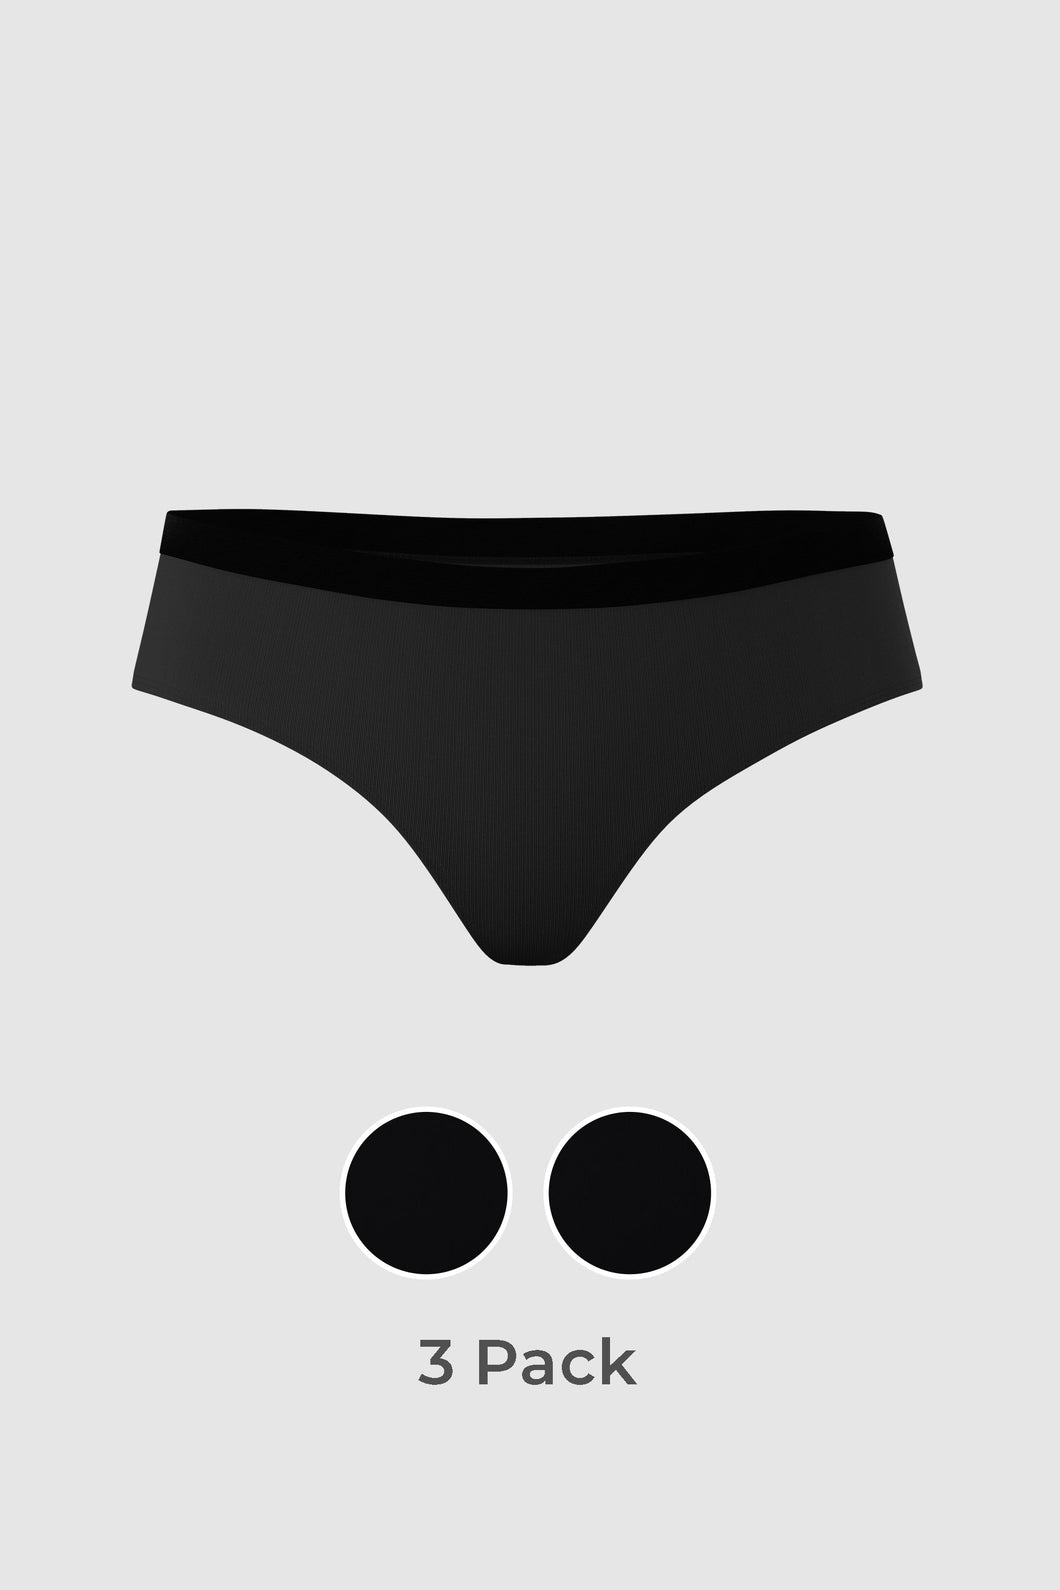 The Triple Trouble | Cheeky Underwear 3 Pack